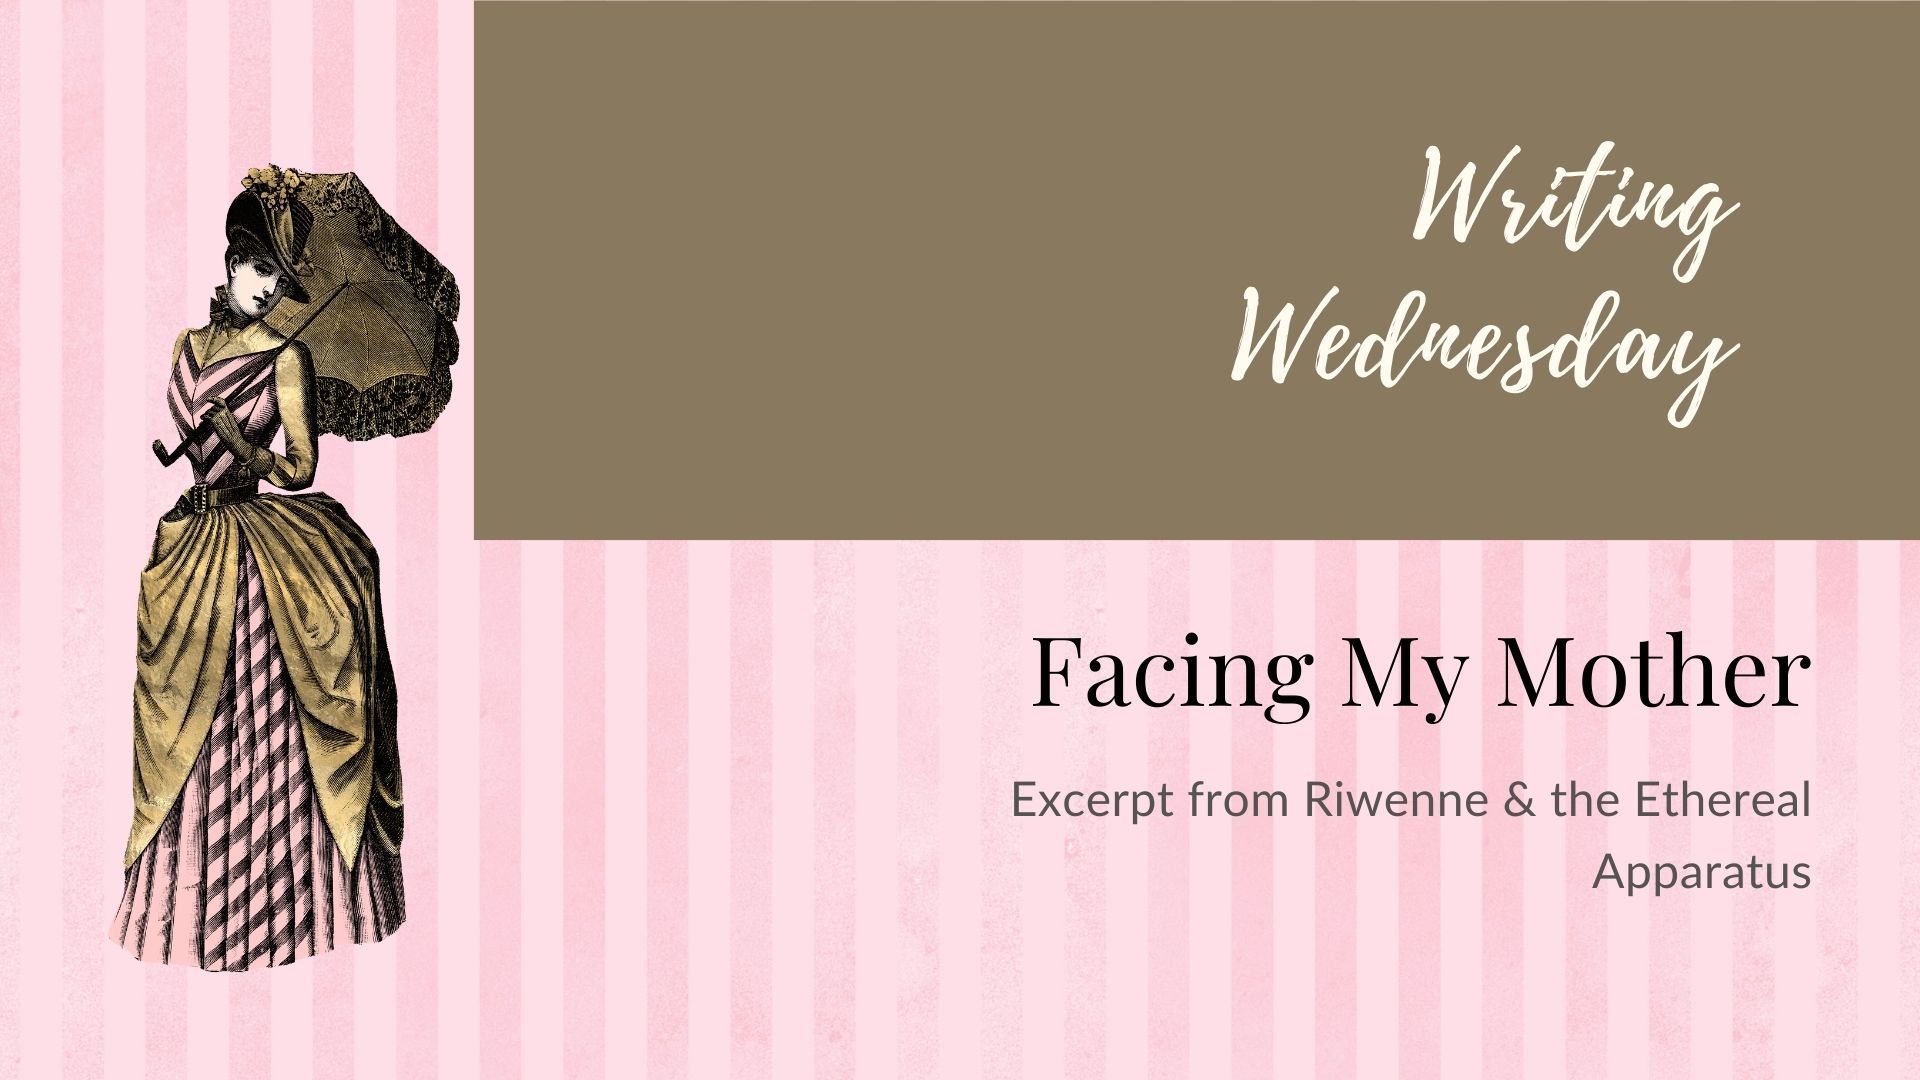 You are currently viewing Writing Wednesday: Facing My Mother